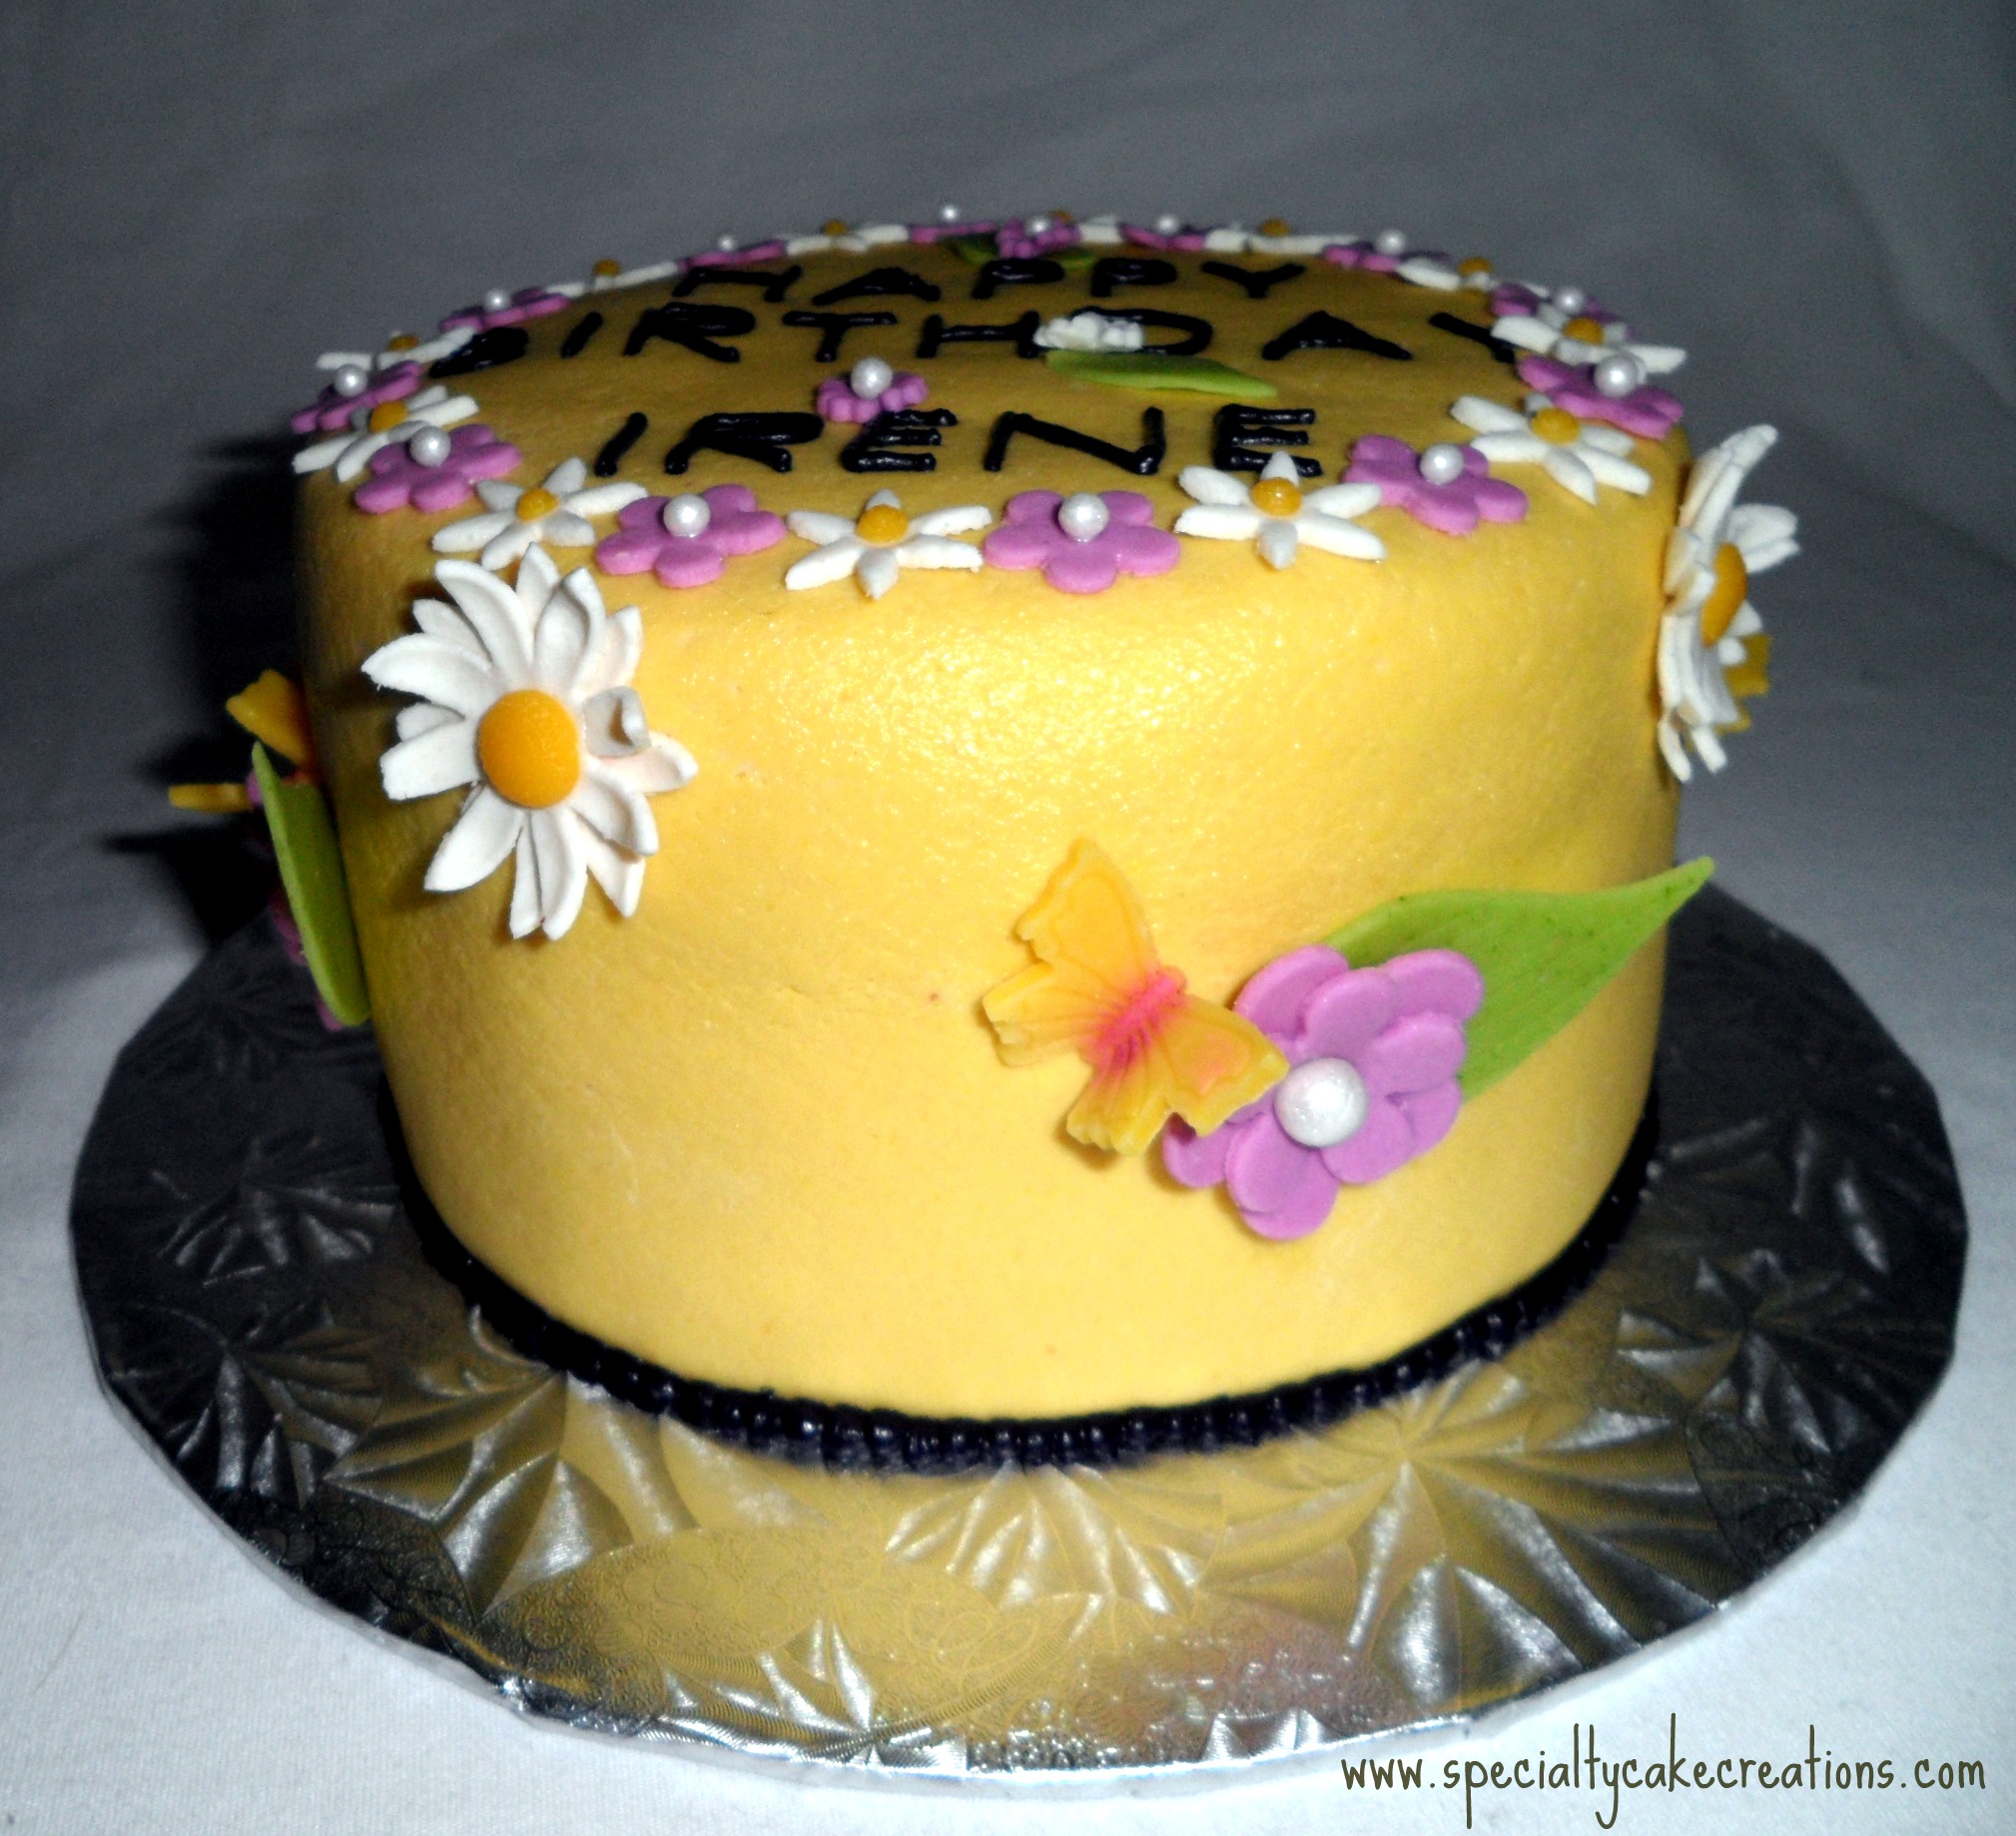 marzipan: Sugared Edible Flowers for Cake Decorating